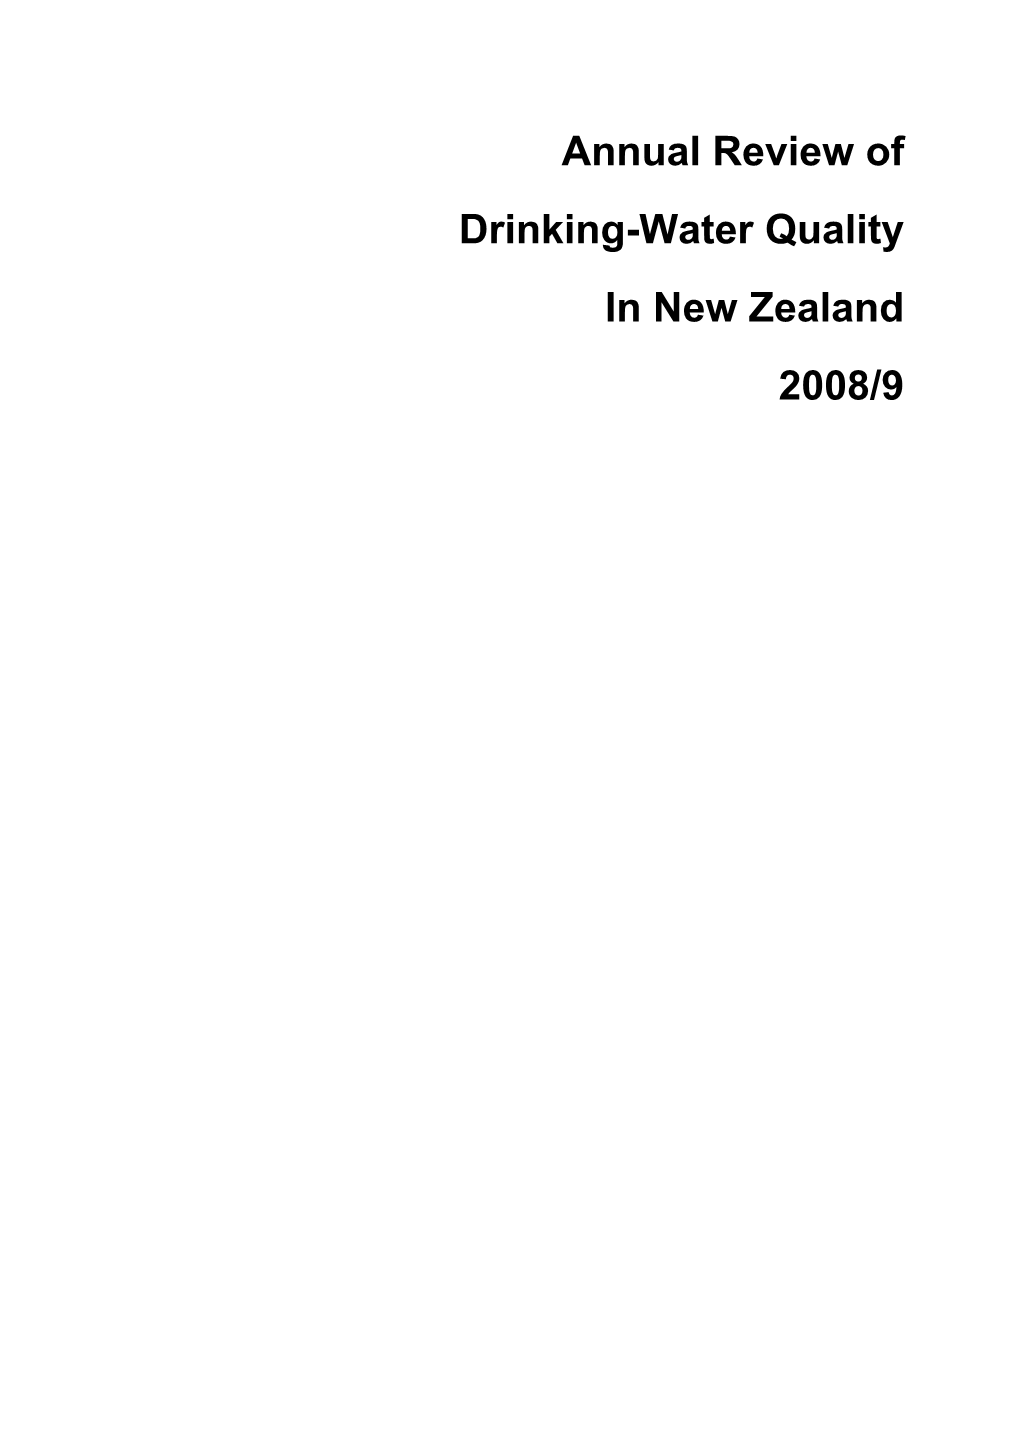 Annual Review of Drinking-Water Quality in New Zealand 2008/9